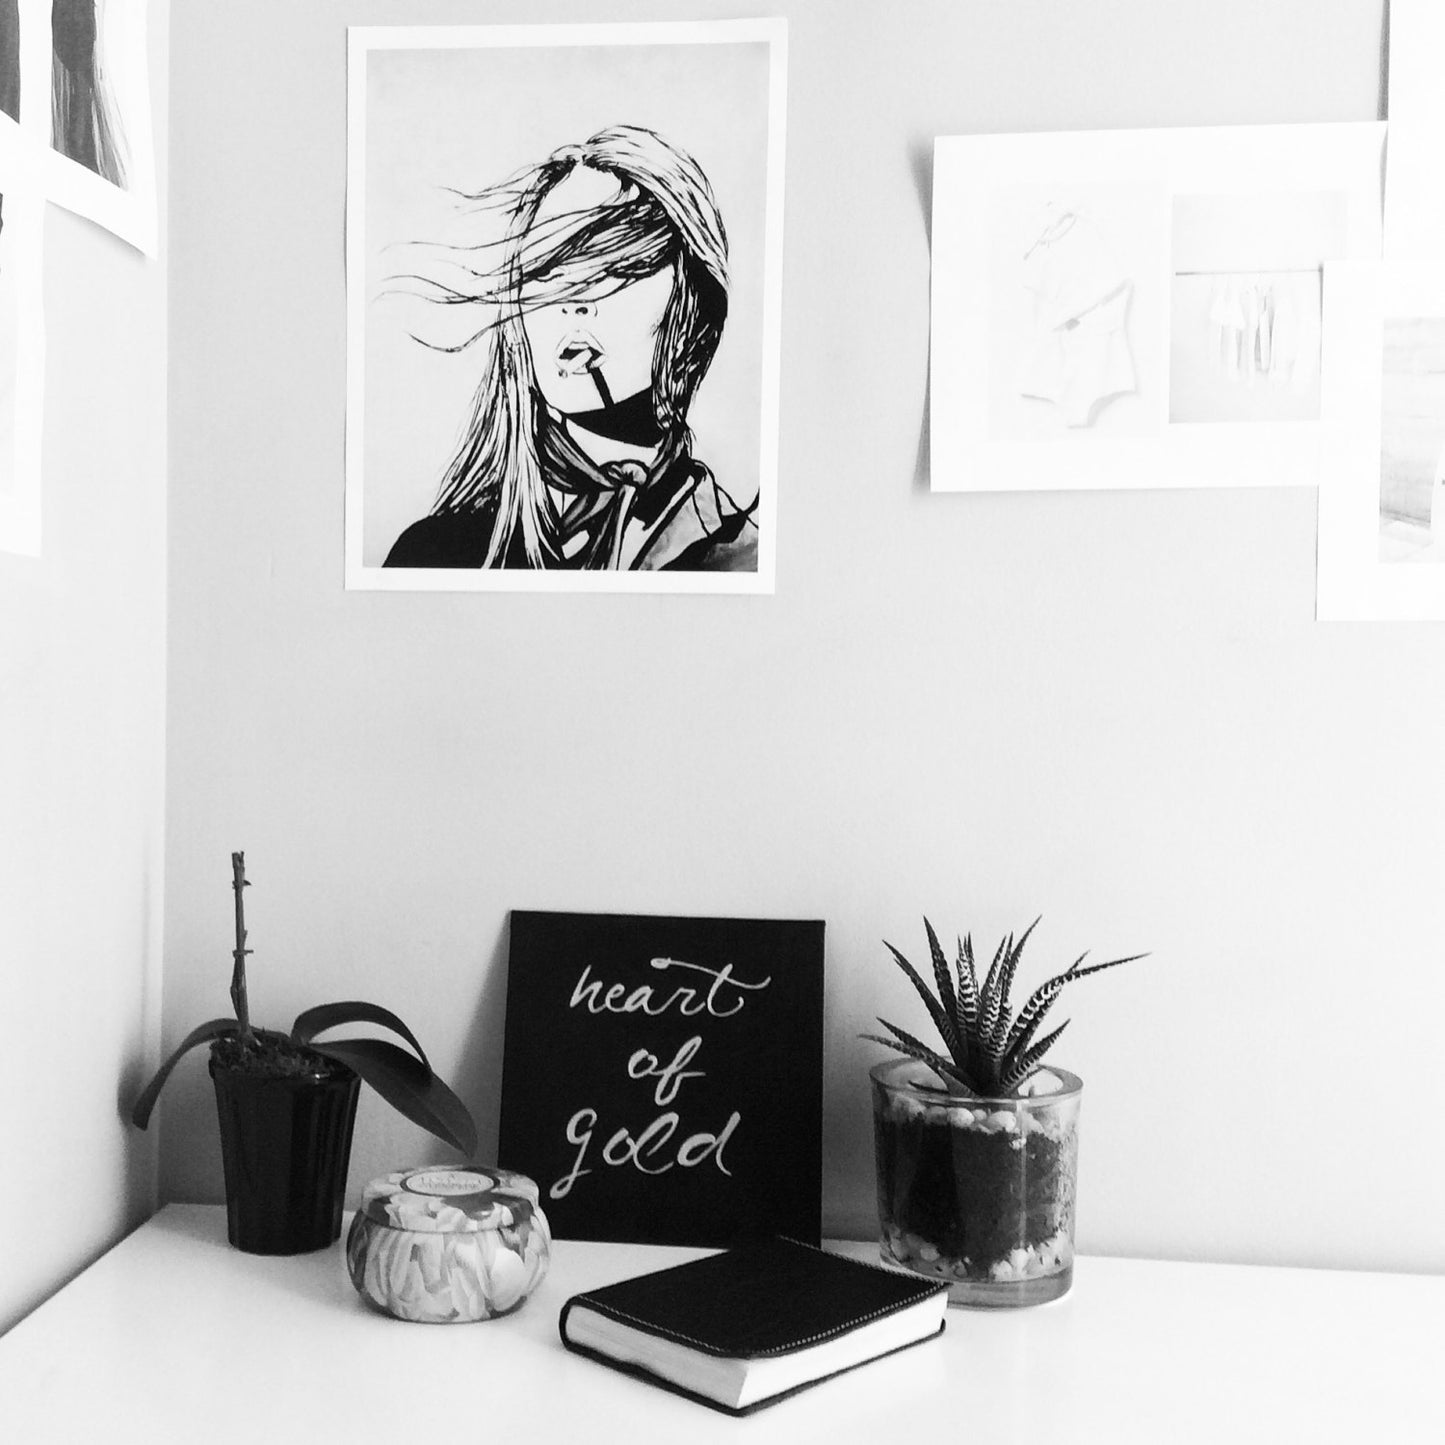 black and white artwork in office setting